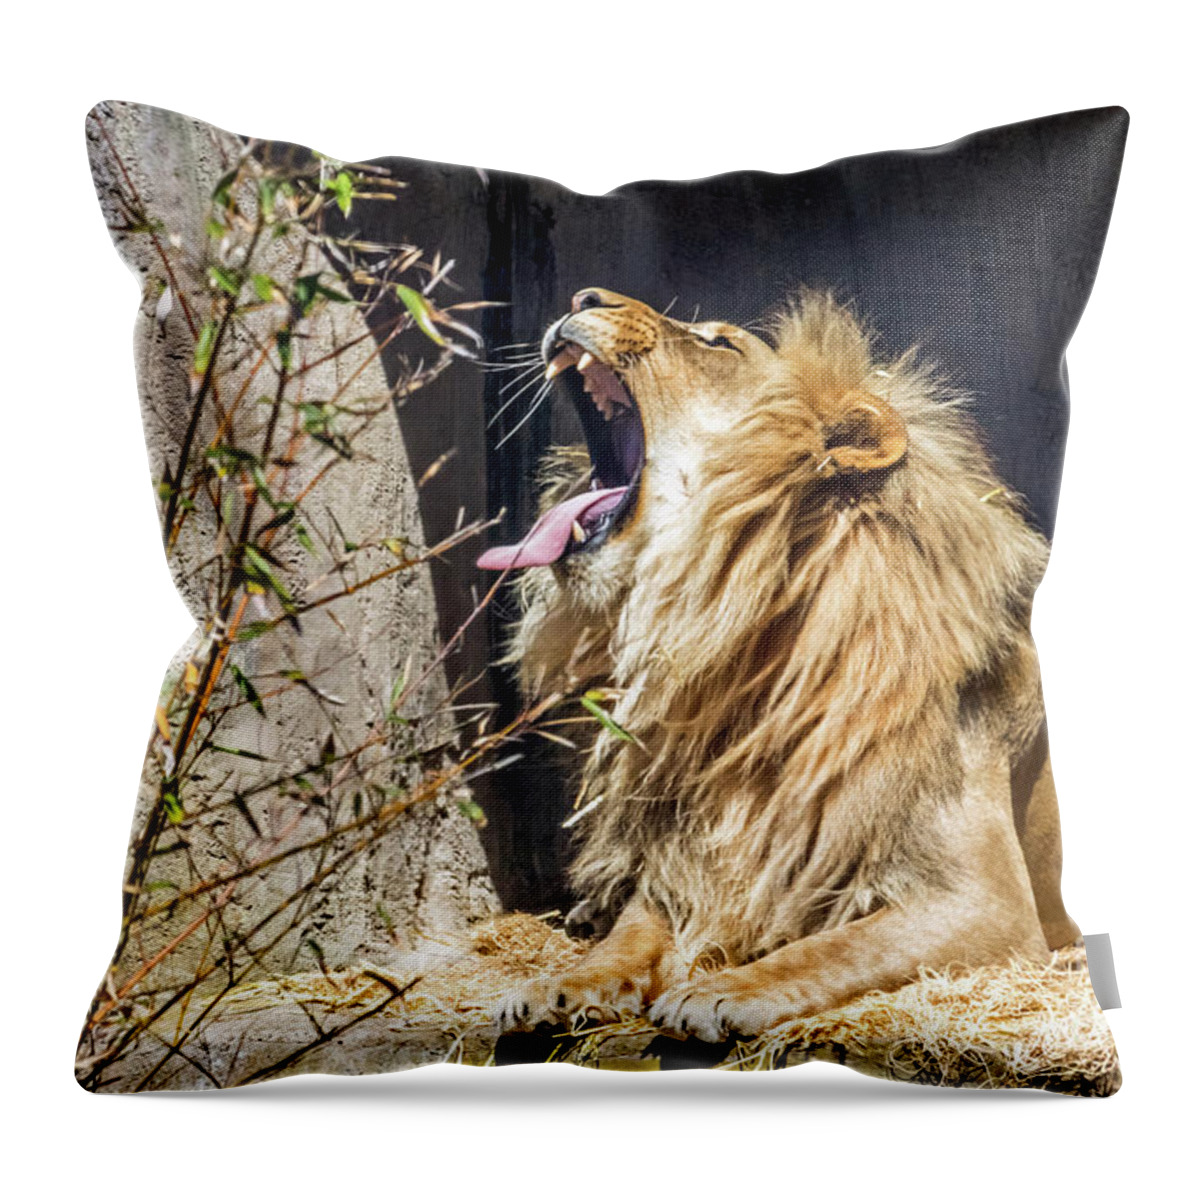 Lion Throw Pillow featuring the photograph Fierce Yawn by Kate Brown